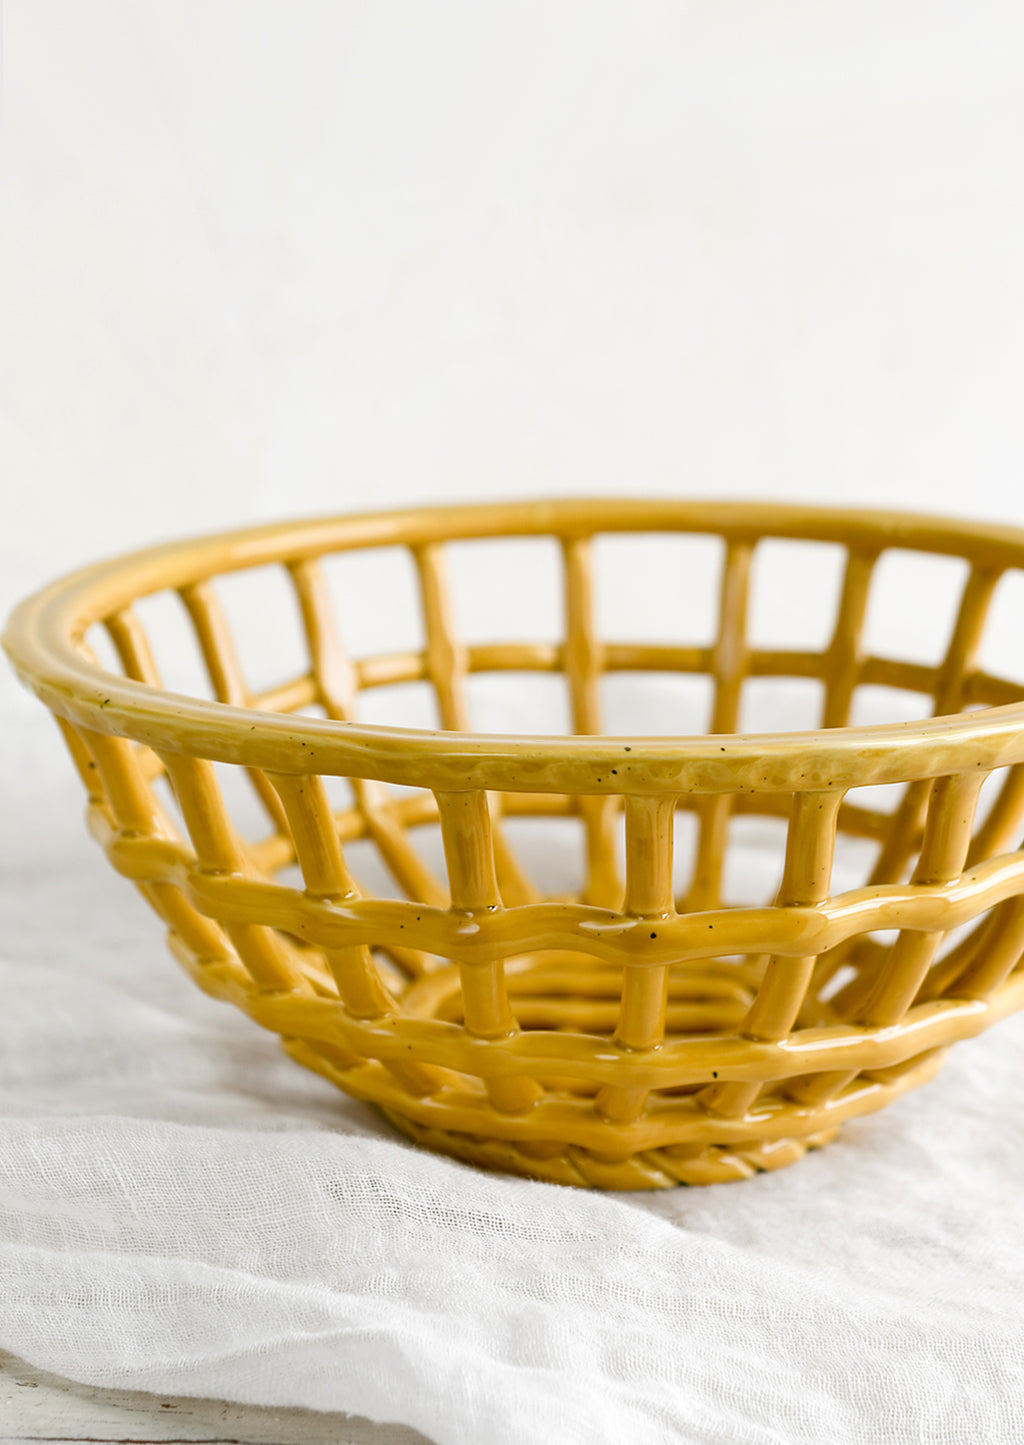 2: An open weave bowl made from mustard-colored ceramic.